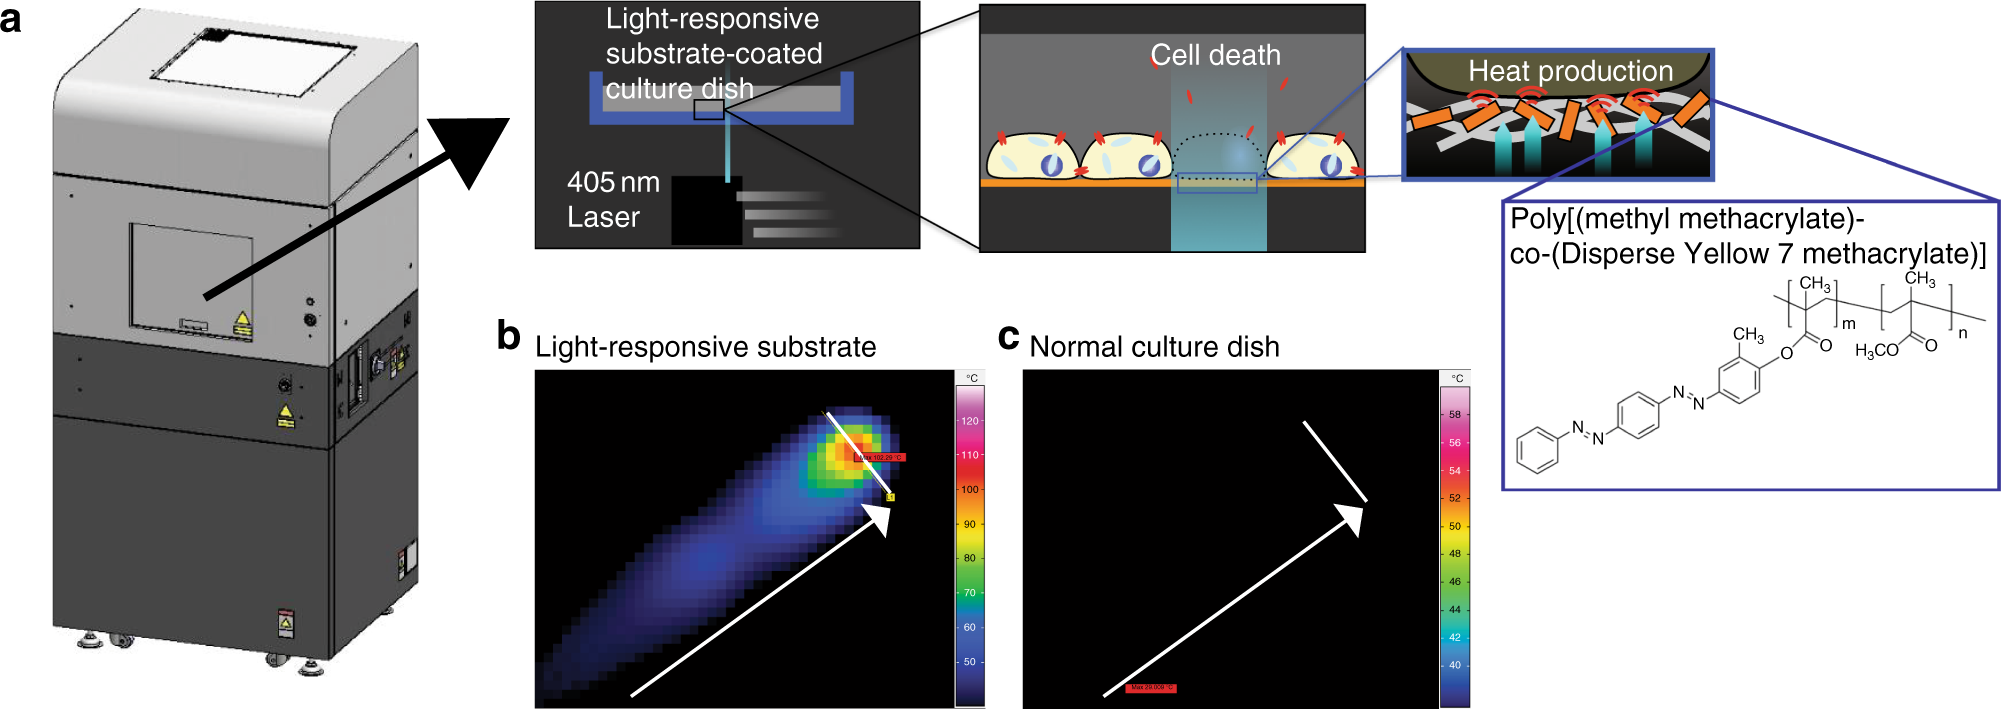 Automated adherent cell elimination by a high-speed laser mediated by a  light-responsive polymer | Communications Biology